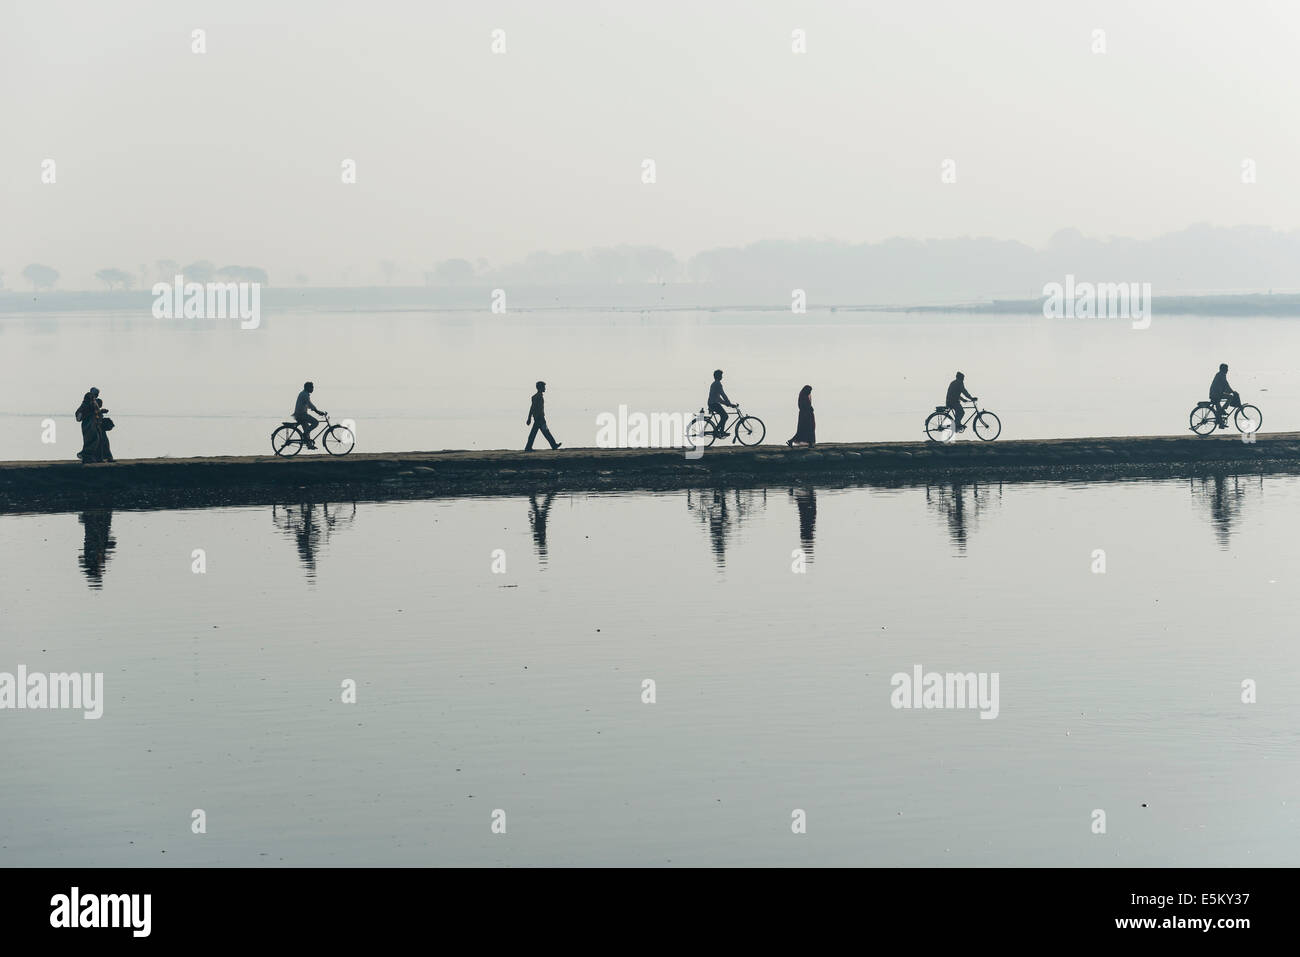 Cyclists and pedestrians crossing the Yamuna river on a dam in the morning, Vrindavan, Uttar Pradesh, India Stock Photo